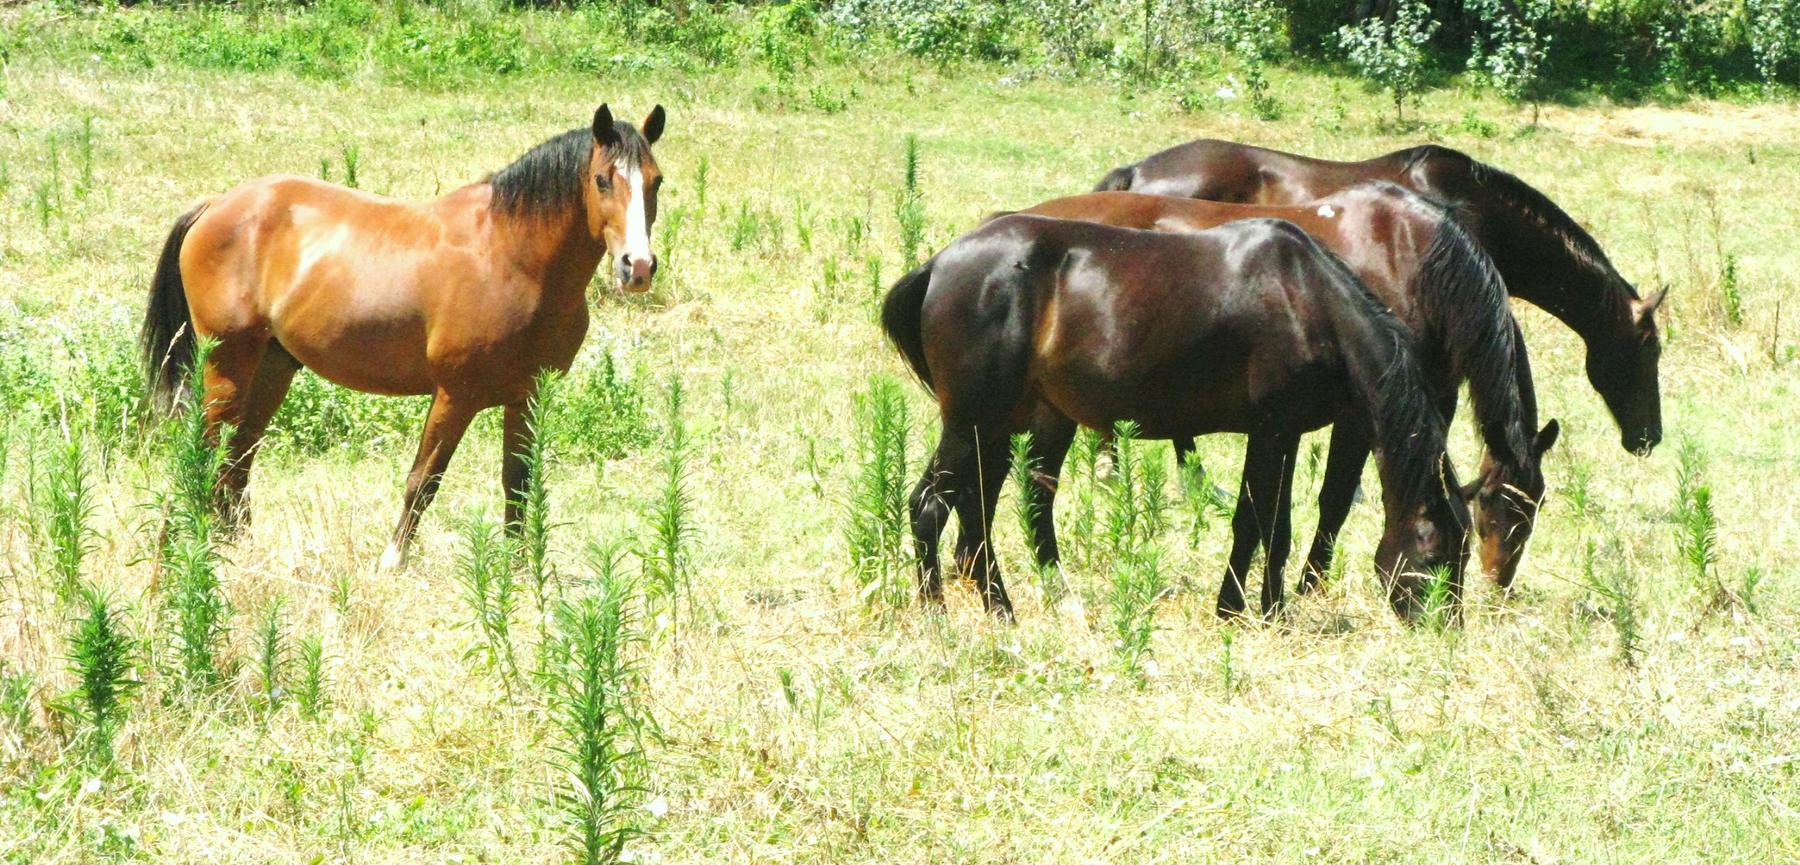 two horses are standing in a field of tall grass - File:EIA infected horses.JPG